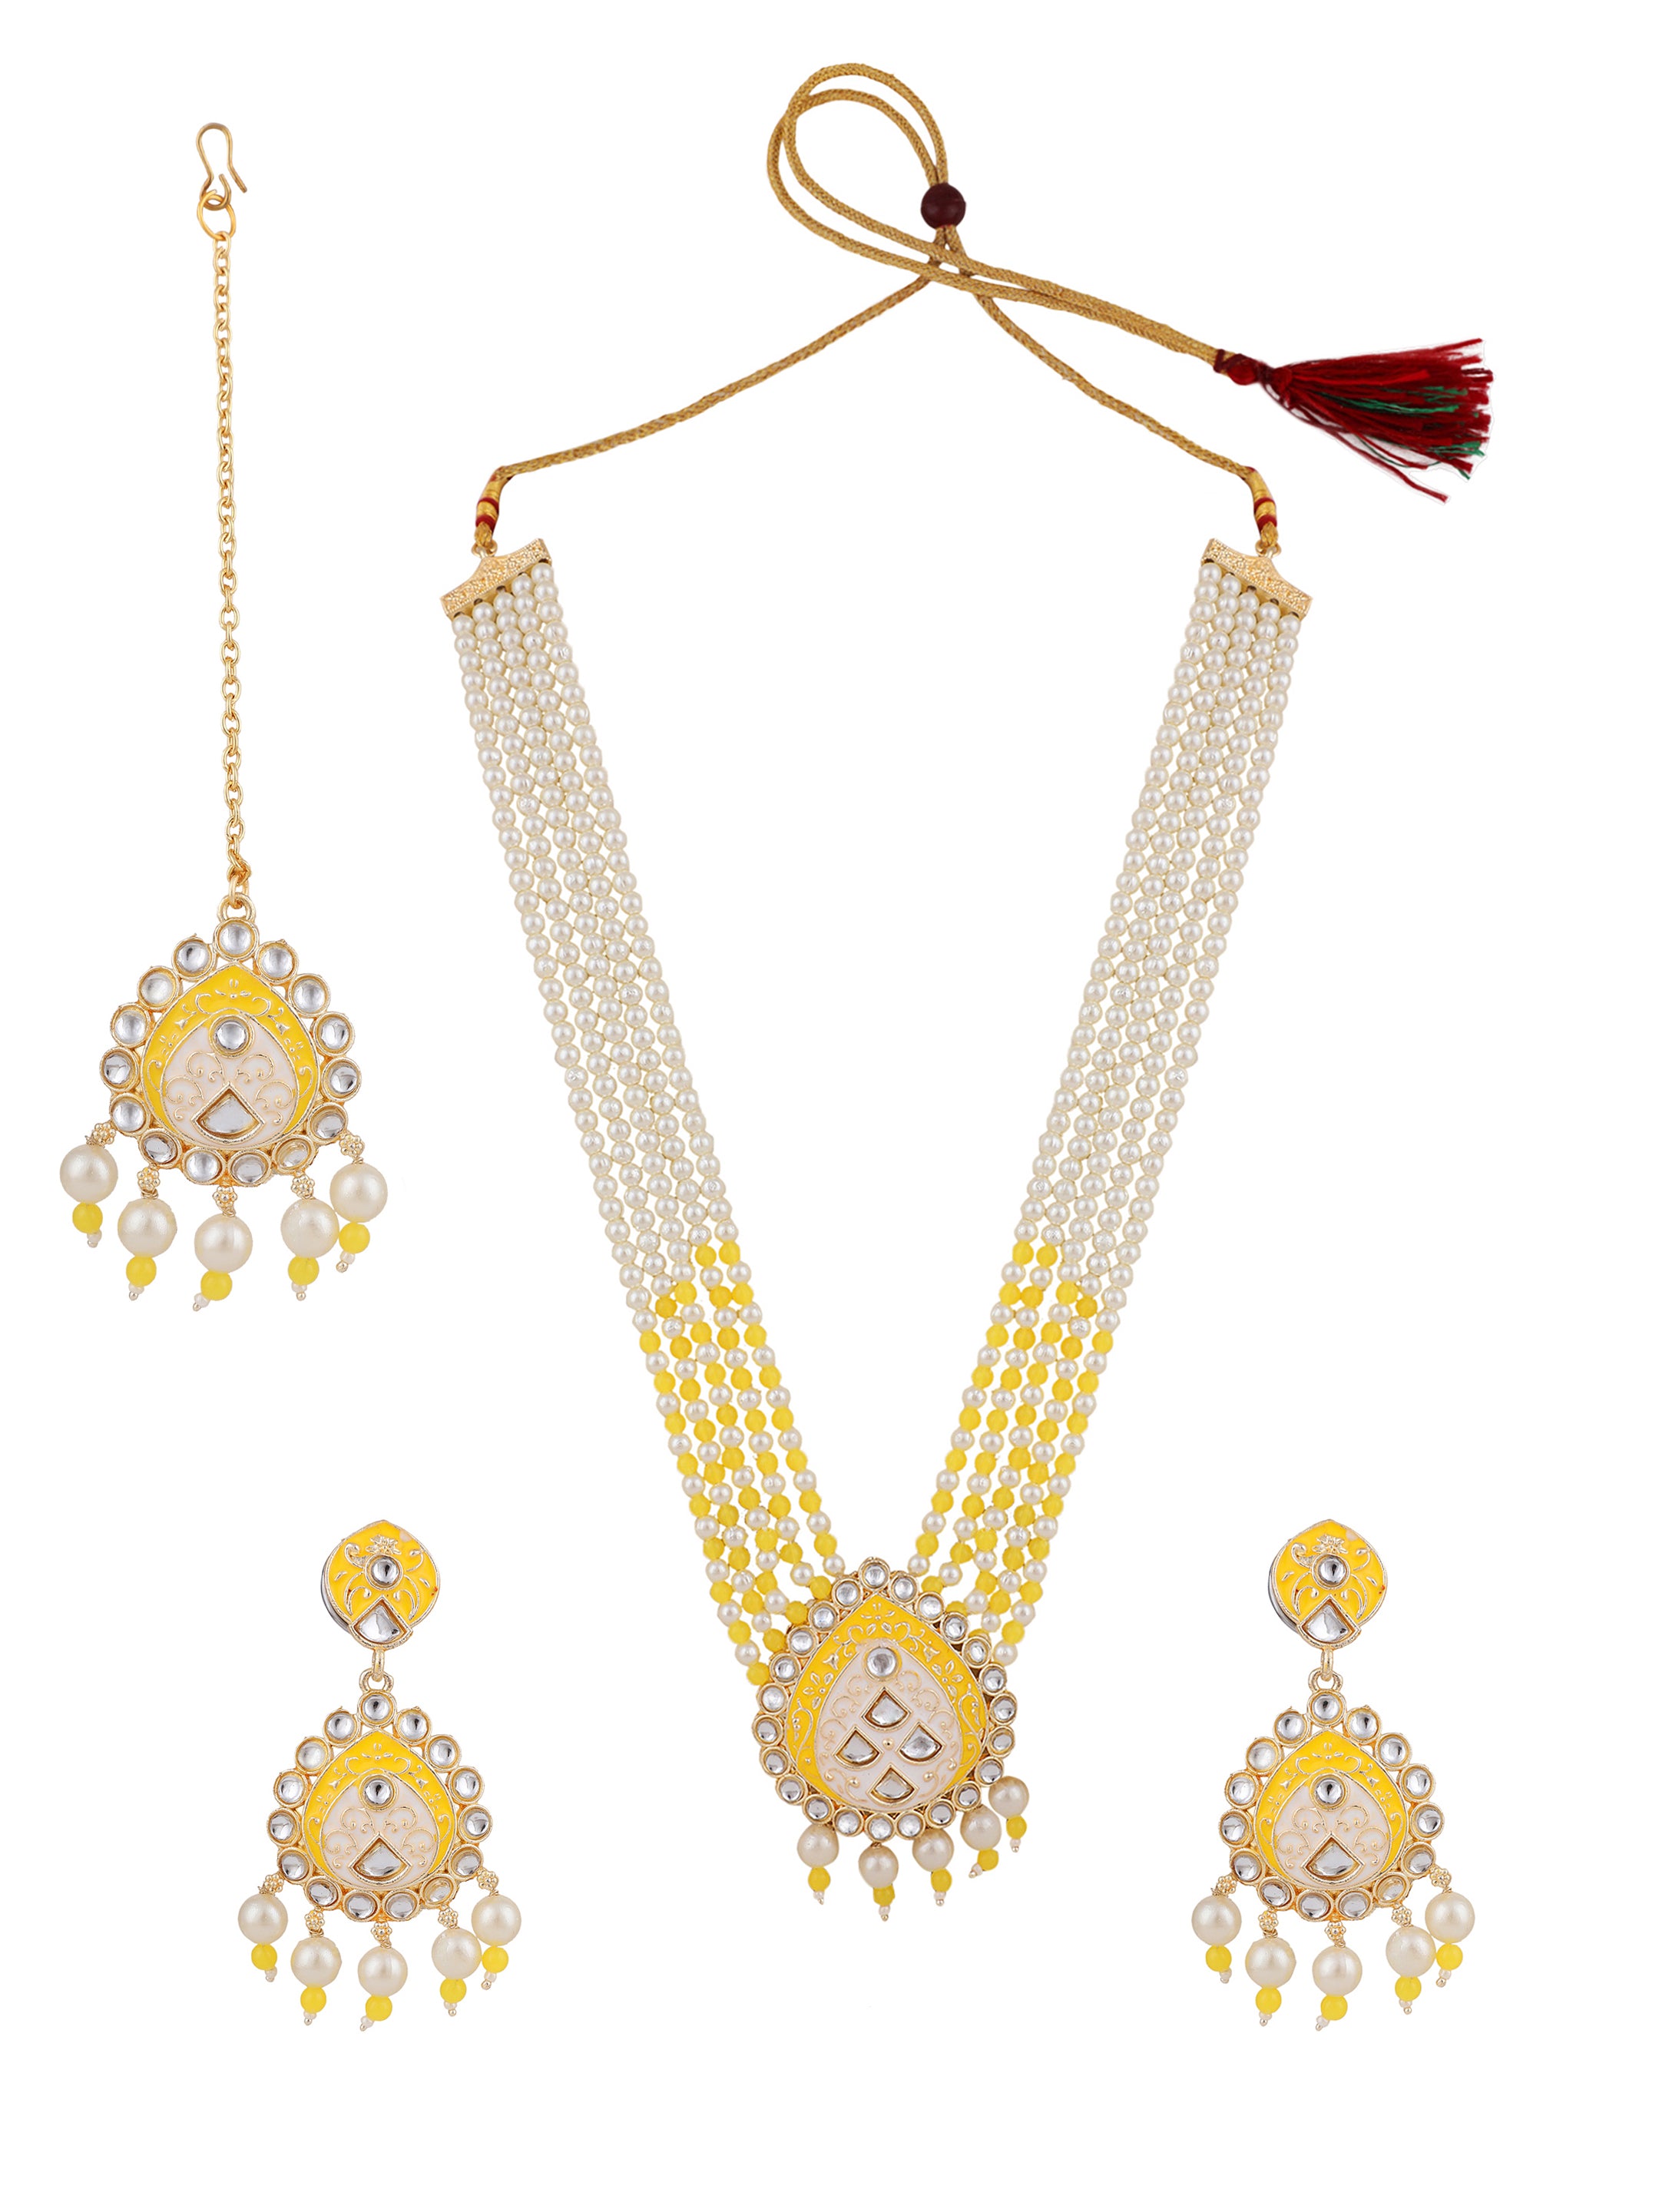 Women's Wedding Wear Yellow Pearl Necklace Set With Maang Tikka - Zaffre Collections